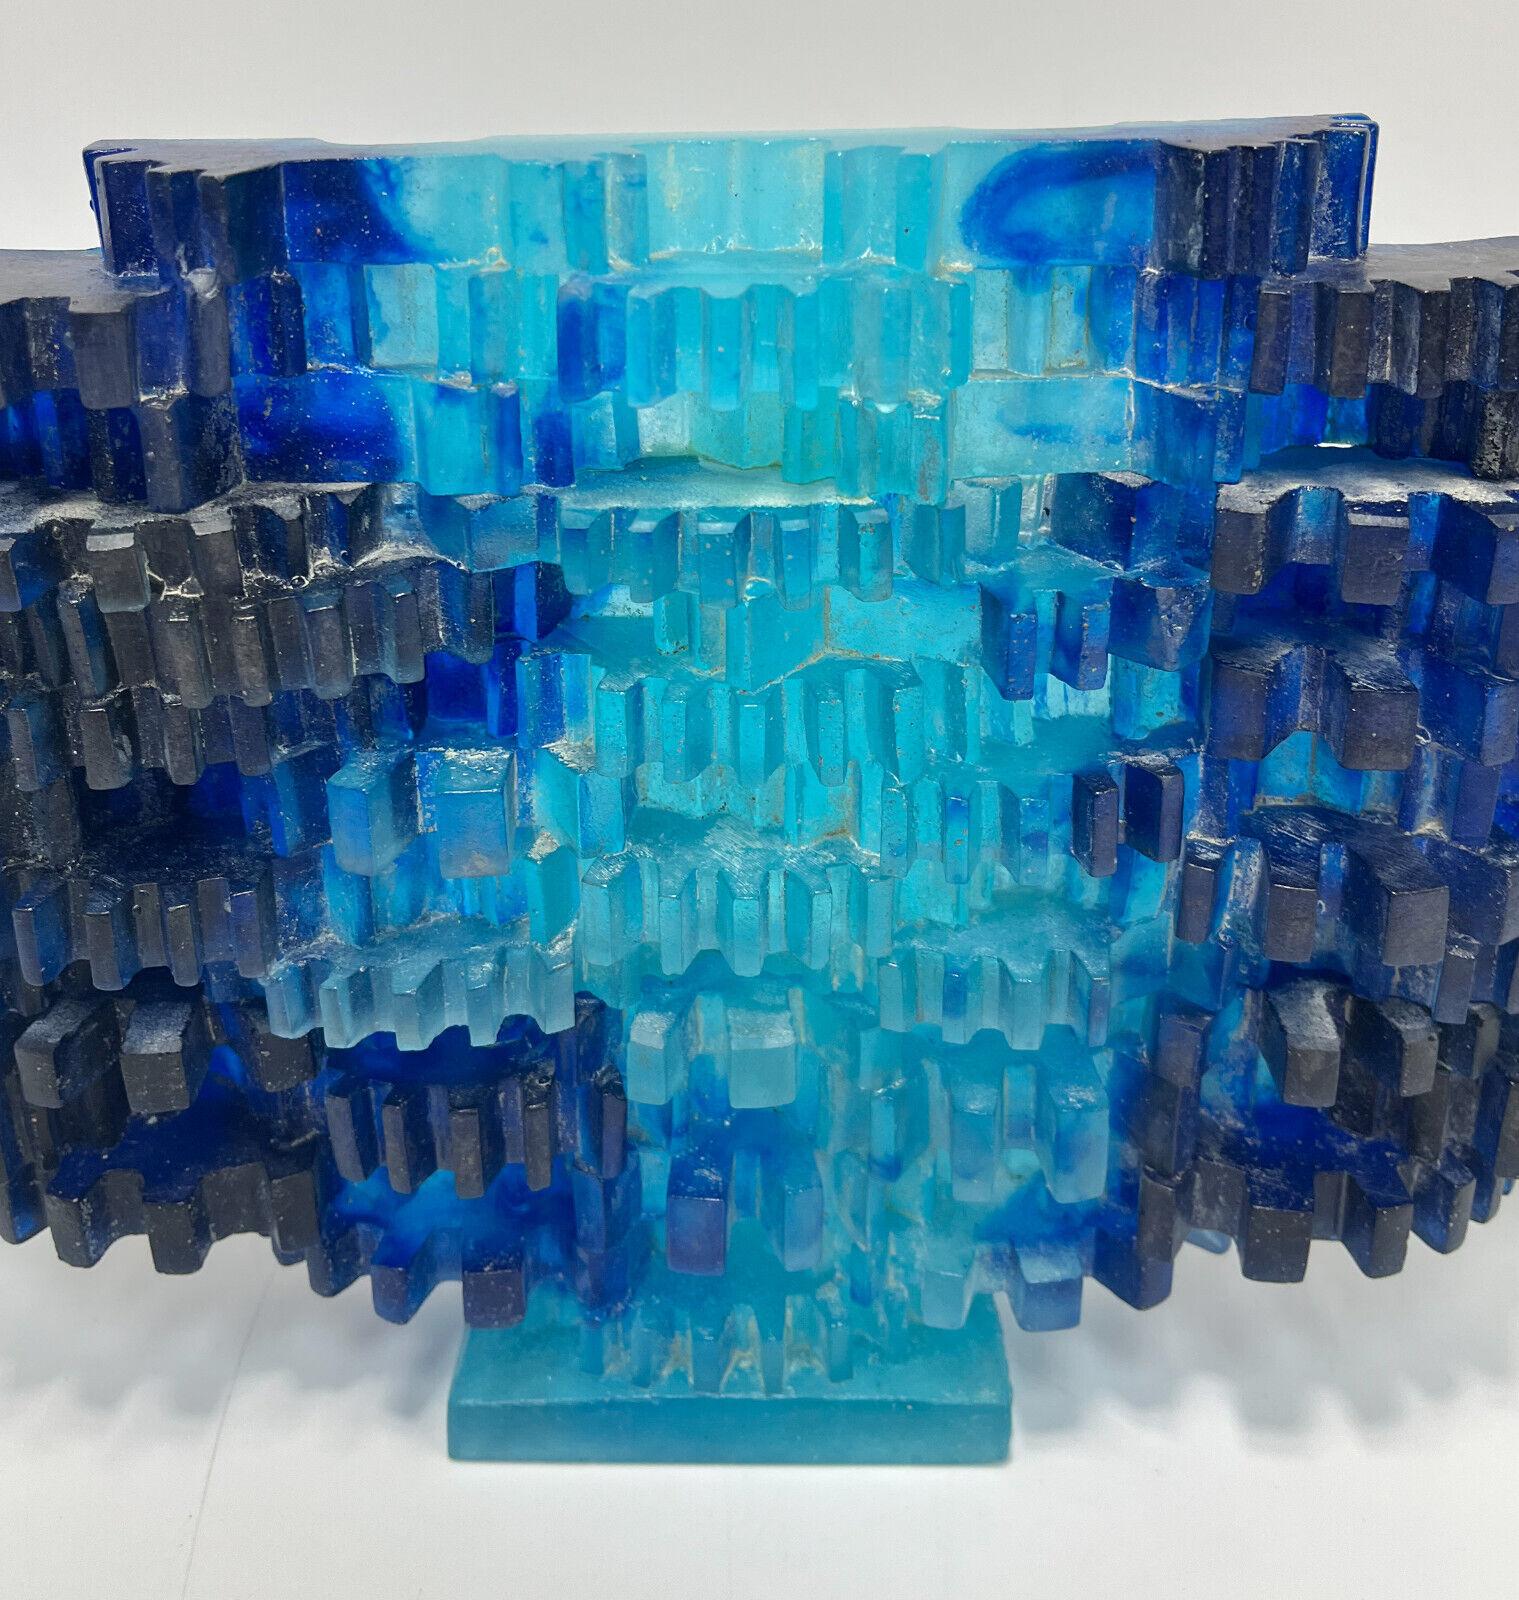 Daum Pate De Vere Abstract Sculpture by Mard de Rosny, Limited Edition of 200

Multi-colored blue ridged cubes throughout. Marked 